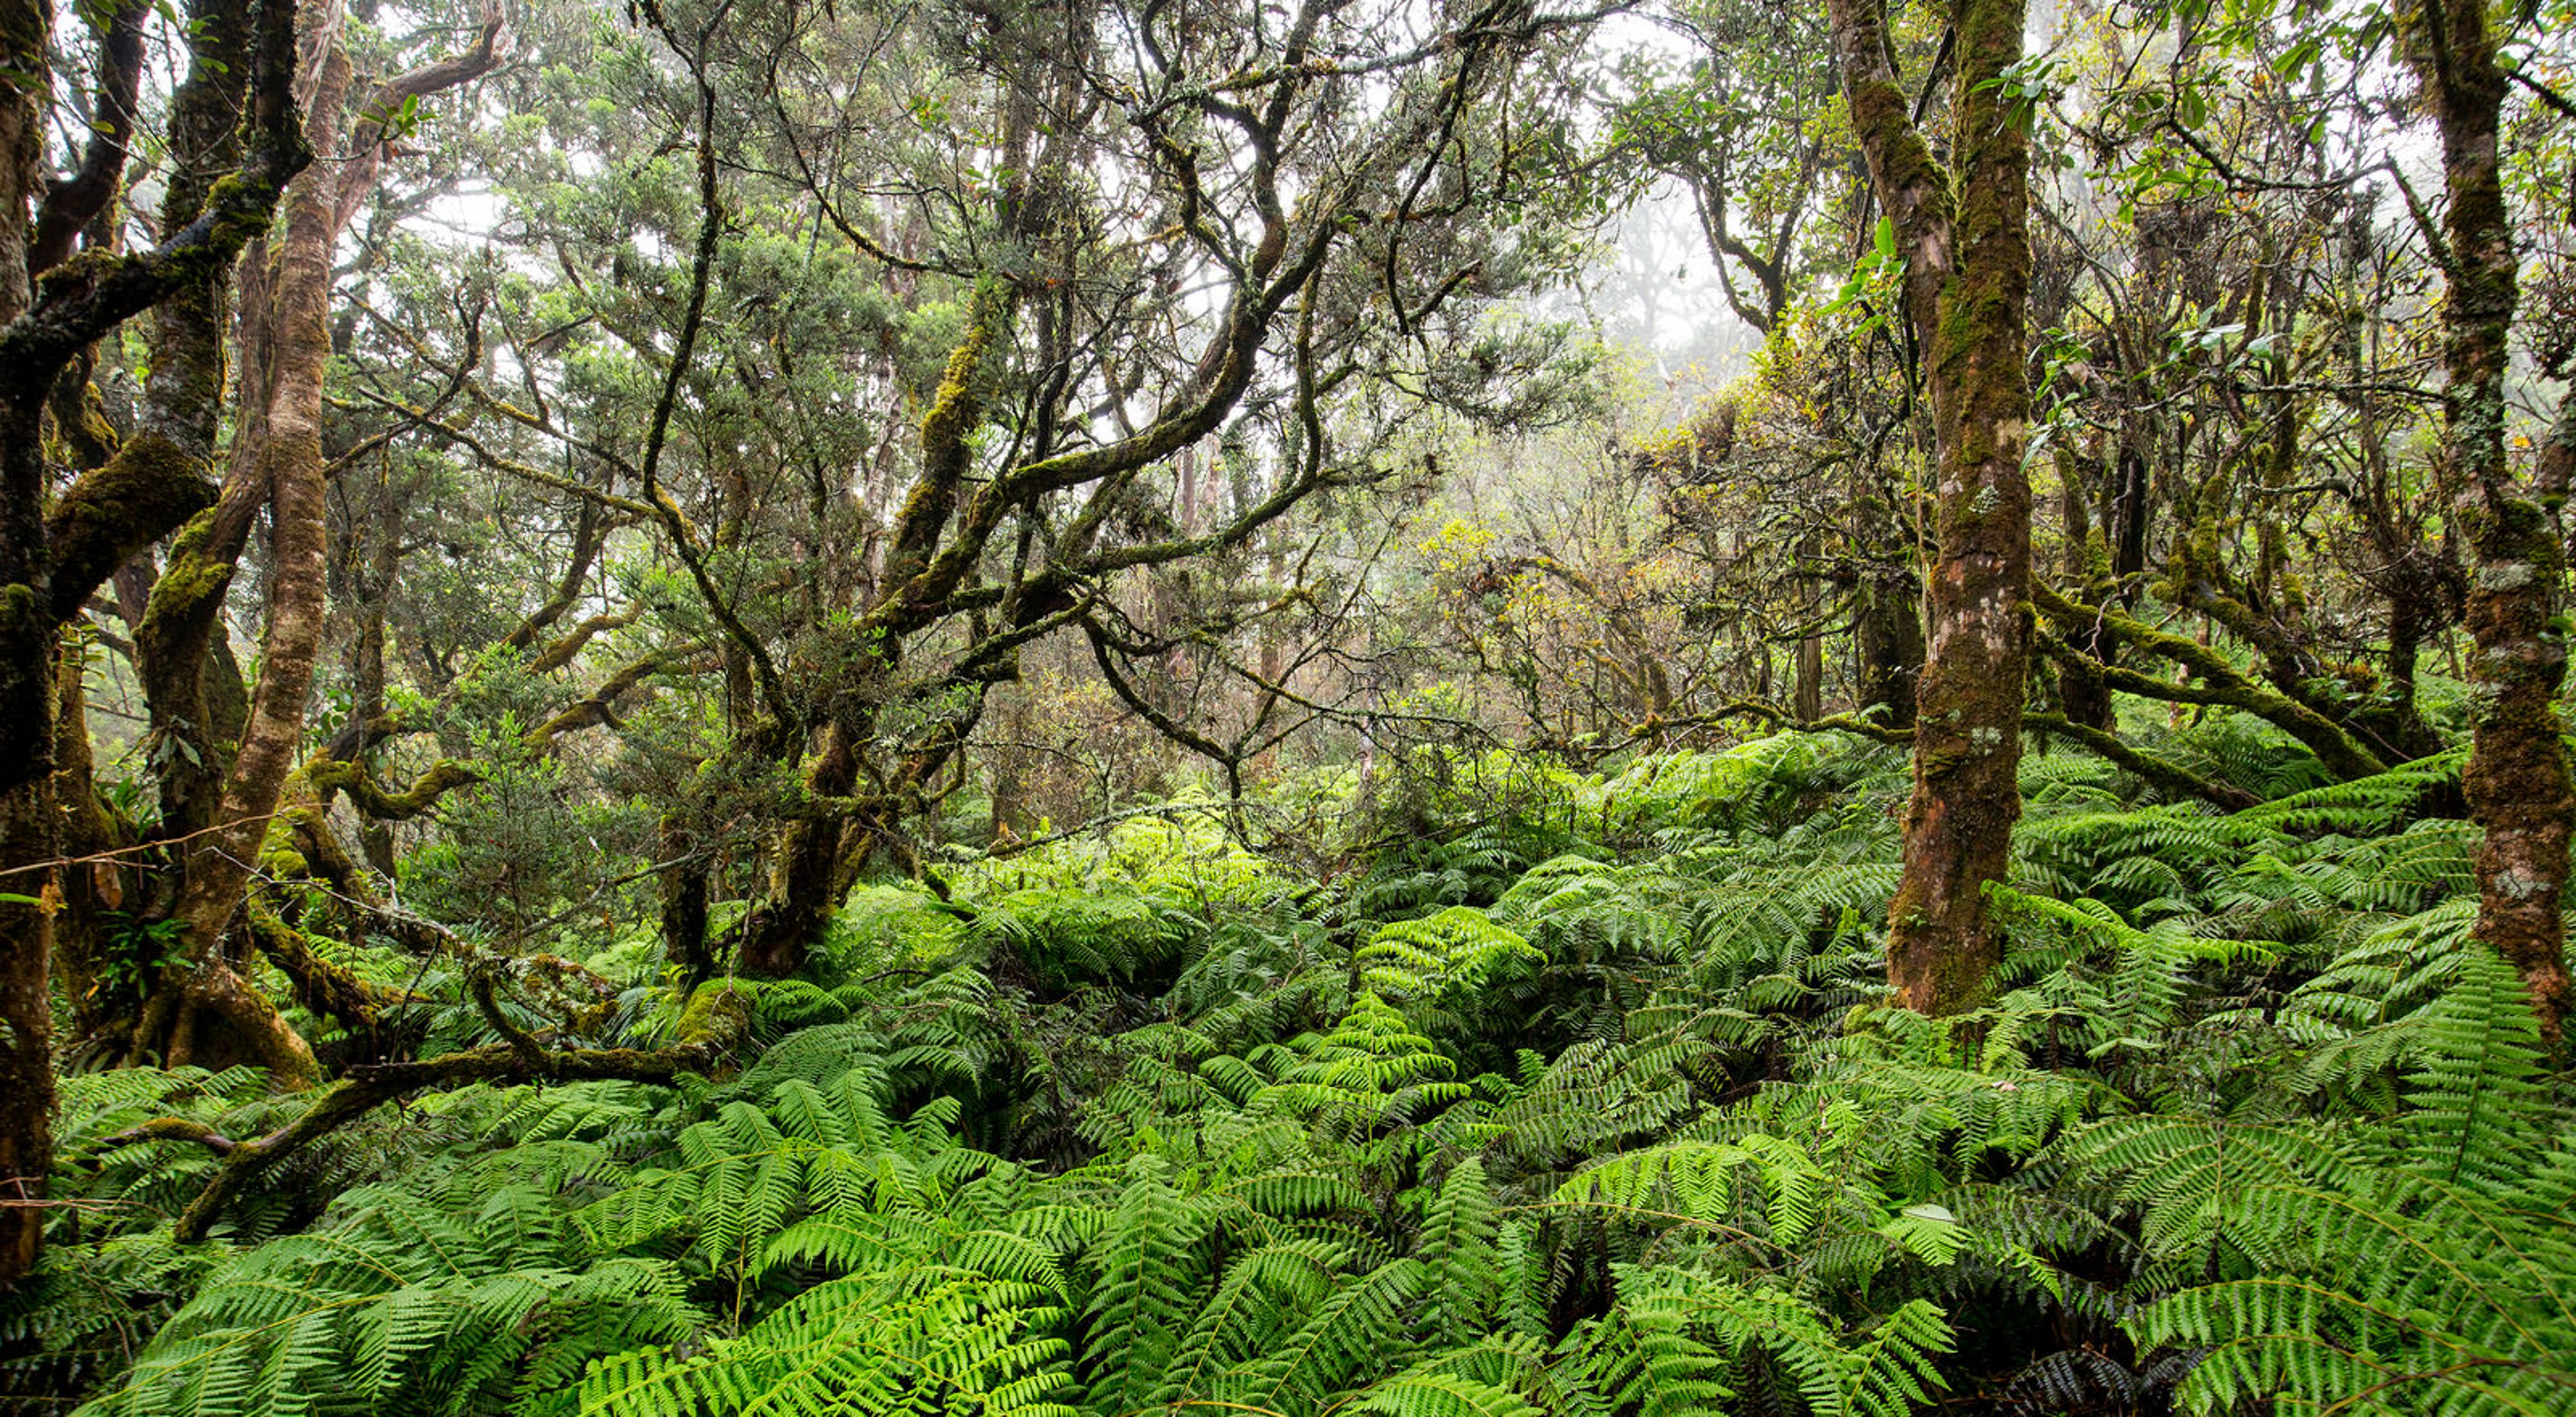 View into a dense, lush tropical forest filled with ferns and moss-covered trees in Hawaii.